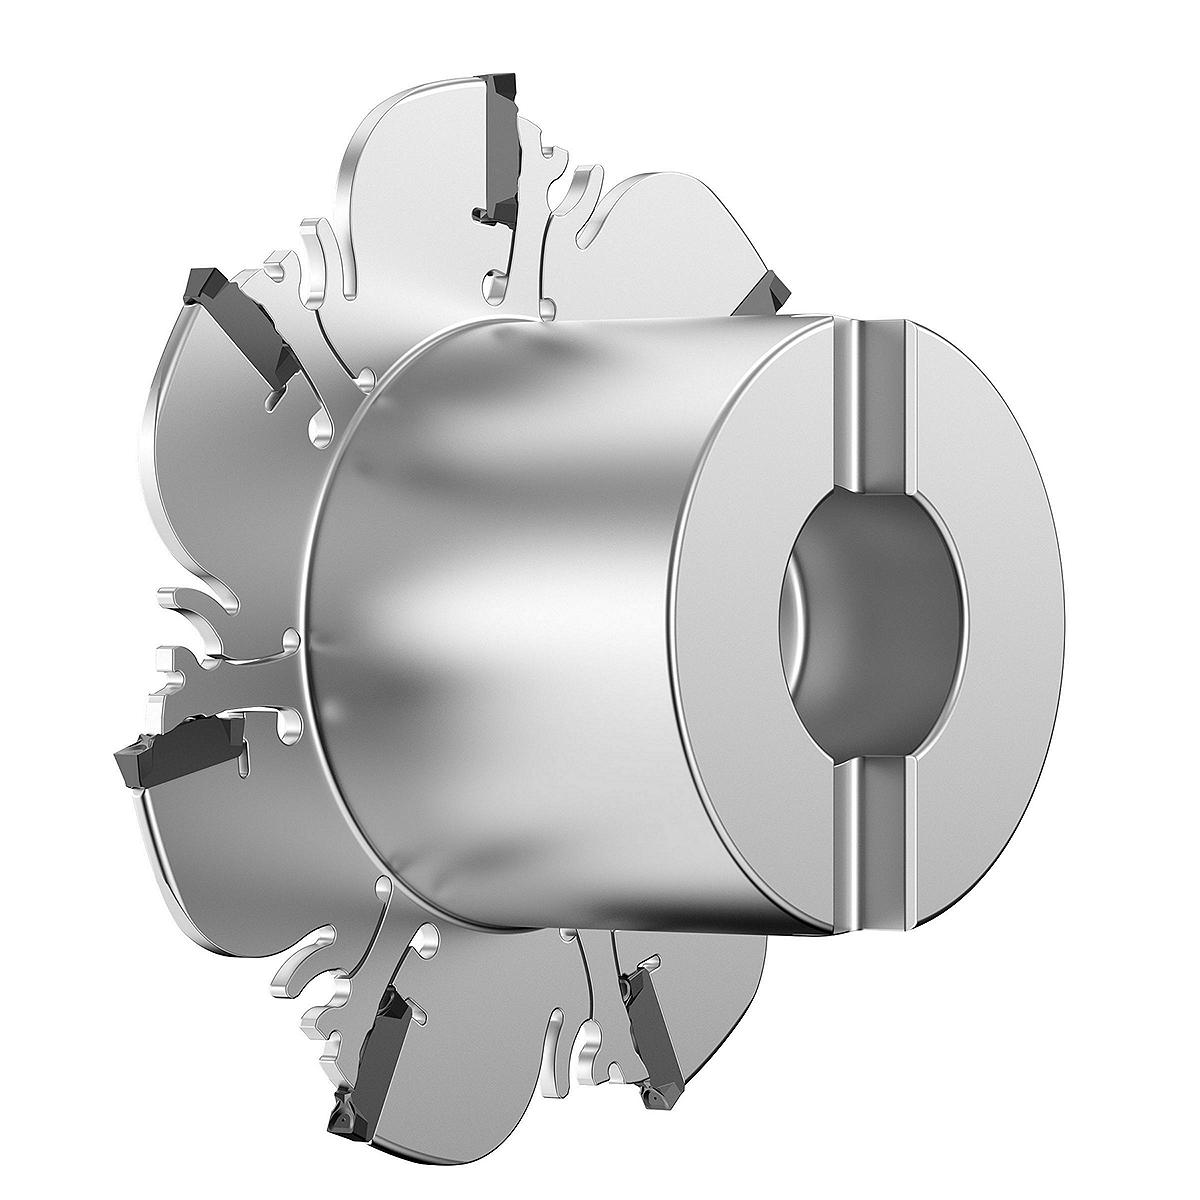 Slot milling cutter for multiple materials.